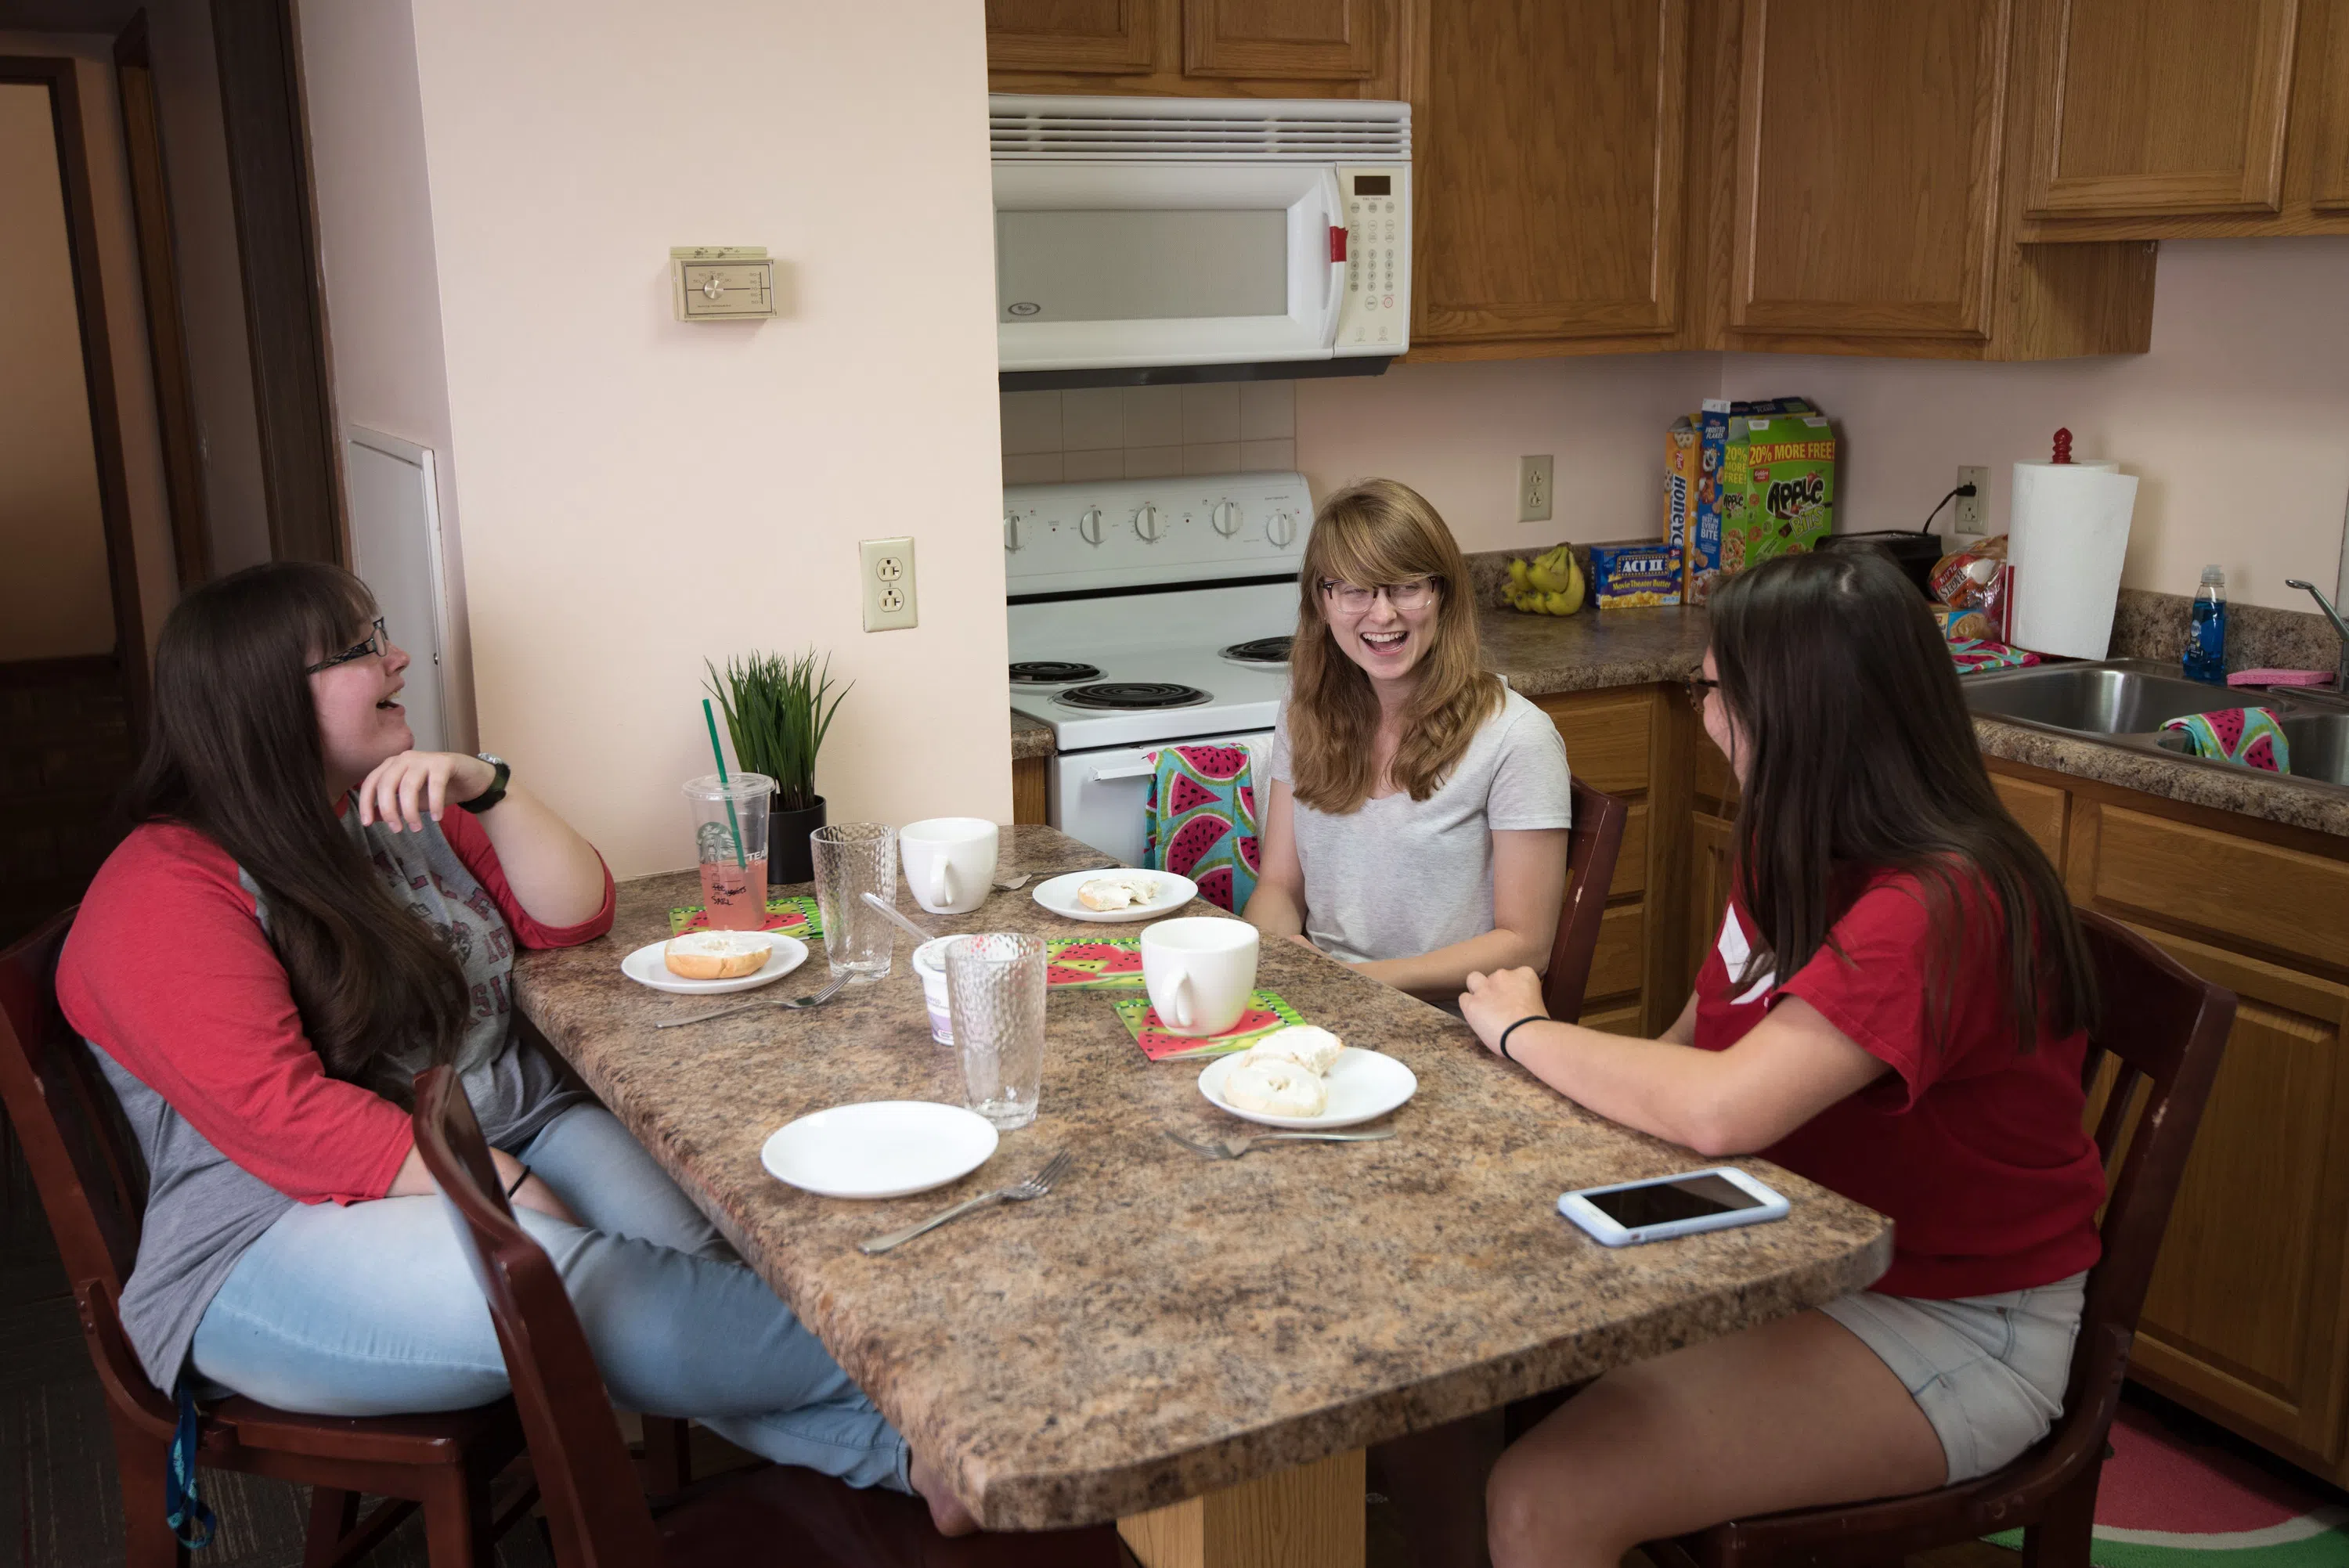 Students sit at the kitchen counter to grab a bite to eat. You can see the full kitchen in the background of the image.